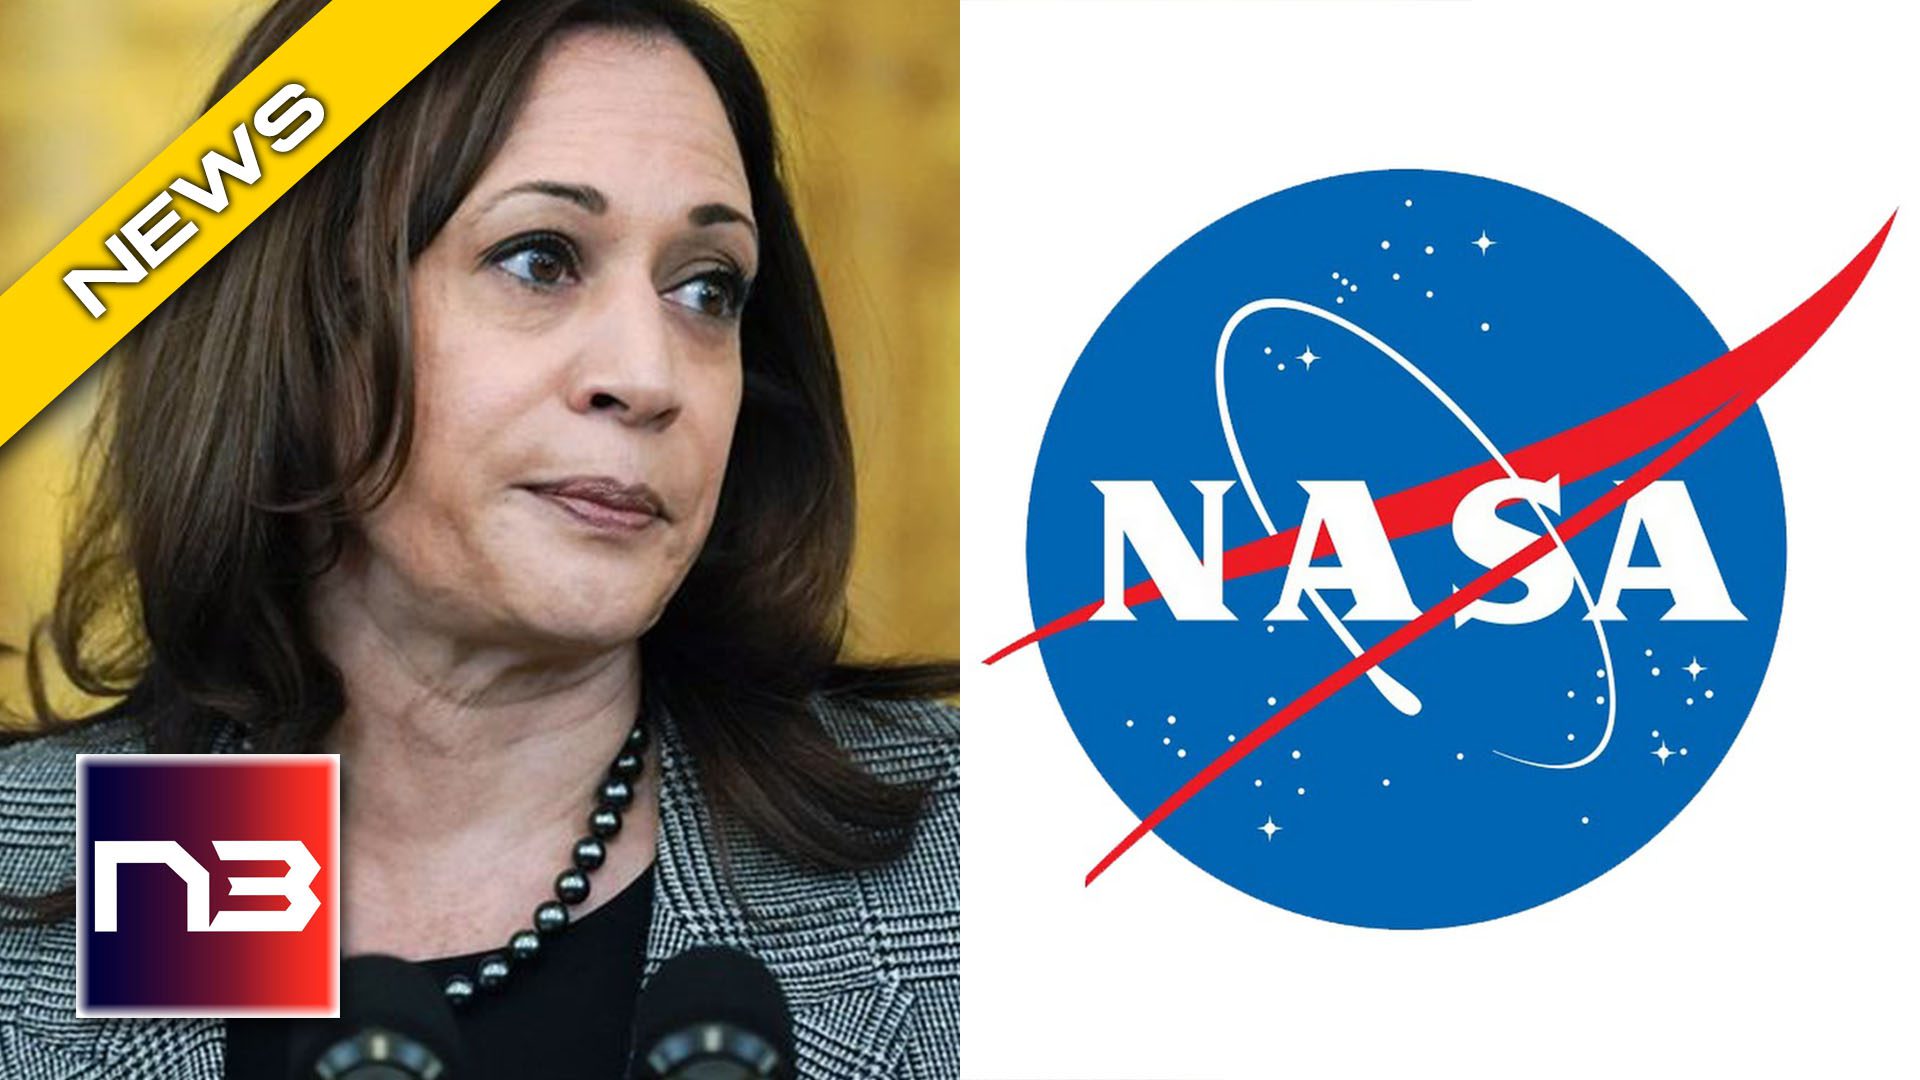 VP Harris has some explaining to do After NASA Launch goes wrong.